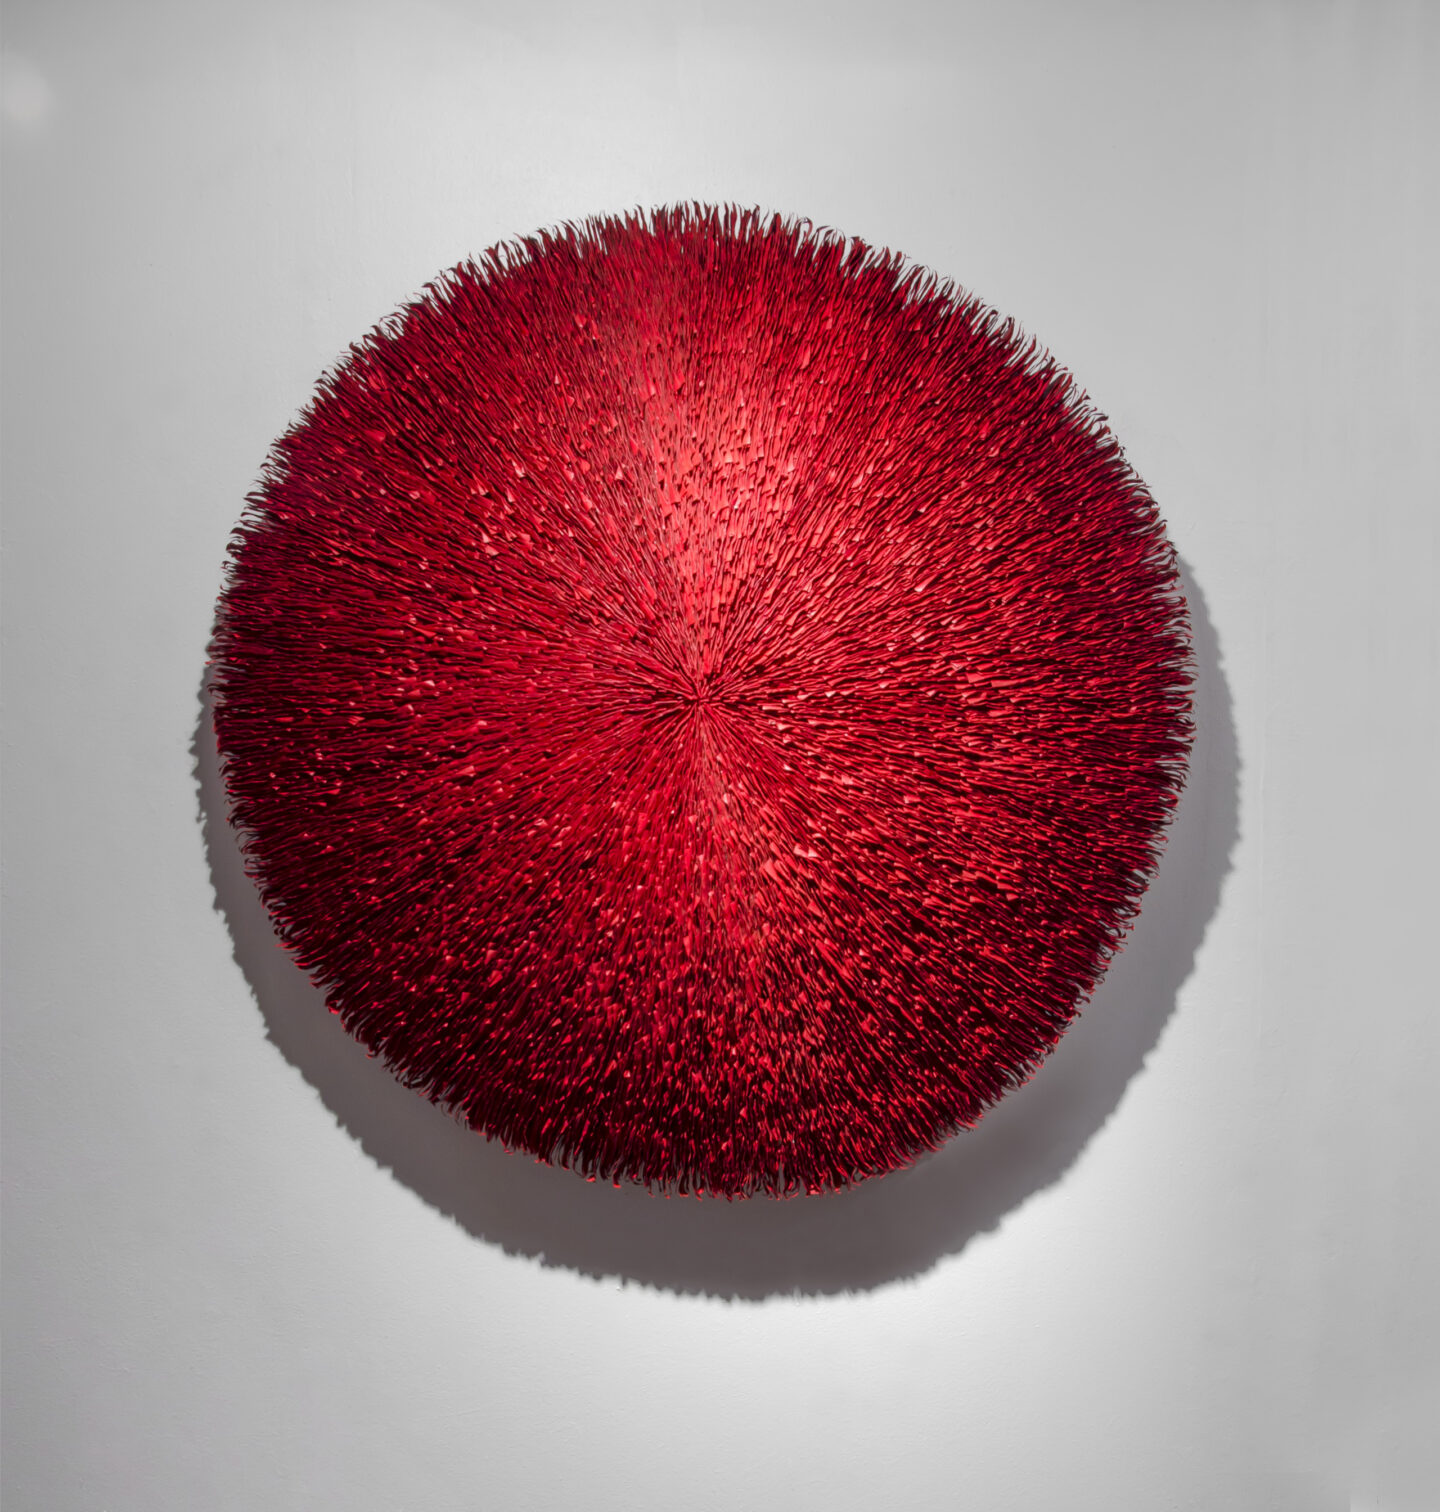 A frontal view of a deep red abstract round wall sculpture made from stacks of paper. Surface is highly textured with lines radiating outwards from the center.